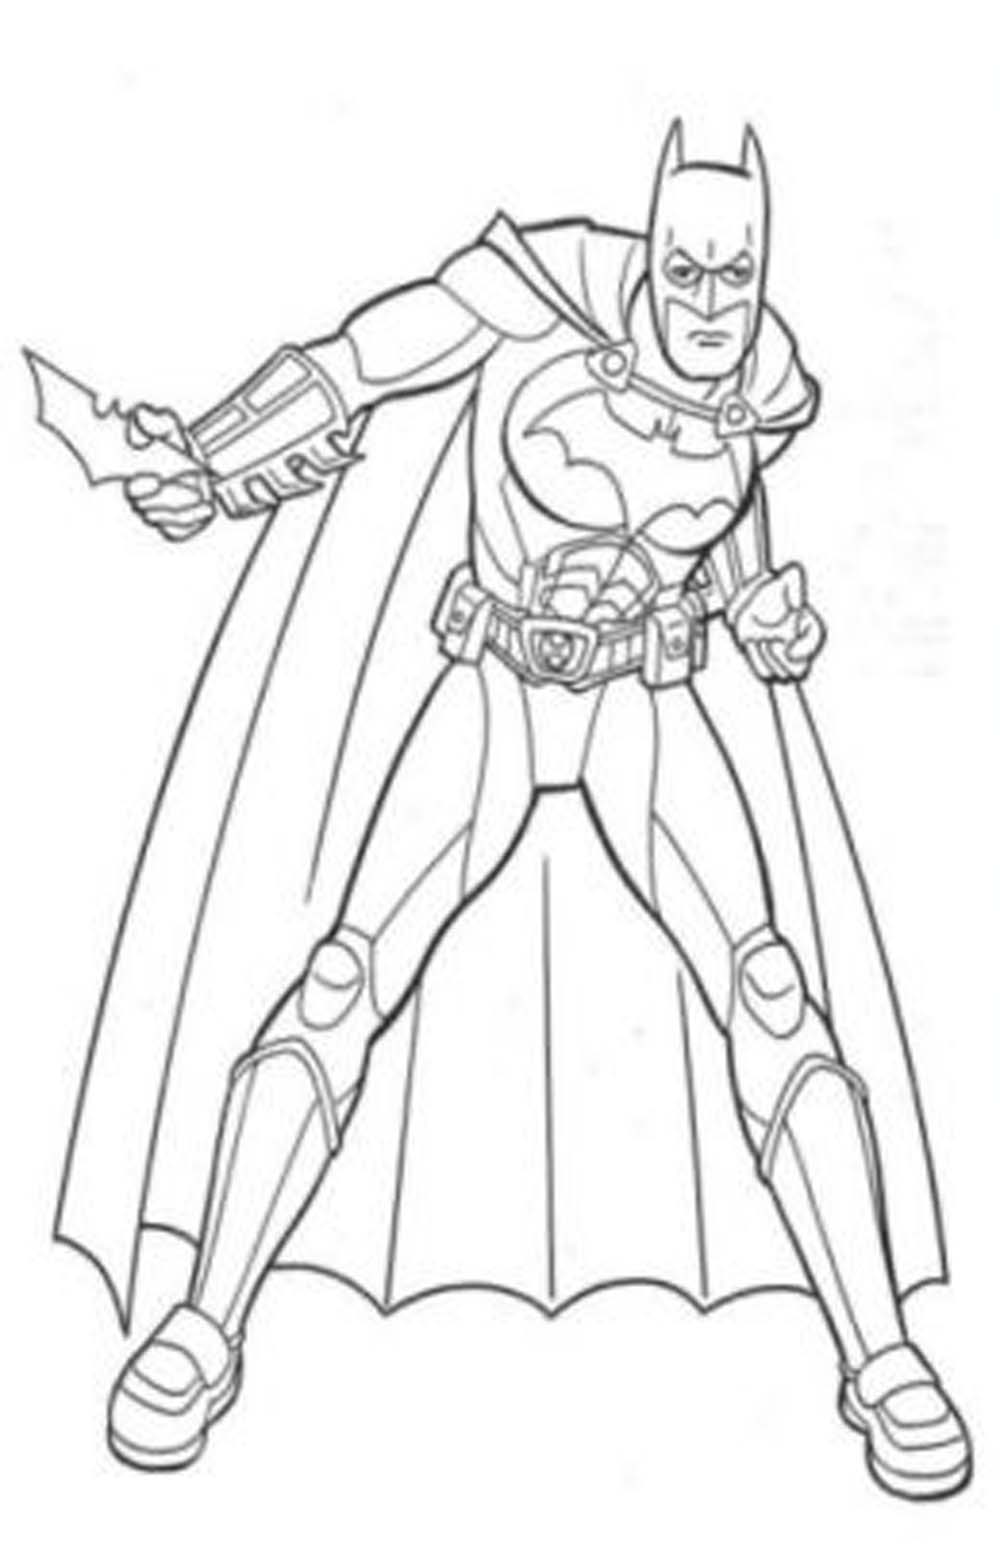 Download Print & Download - Batman Coloring Pages for Your Children